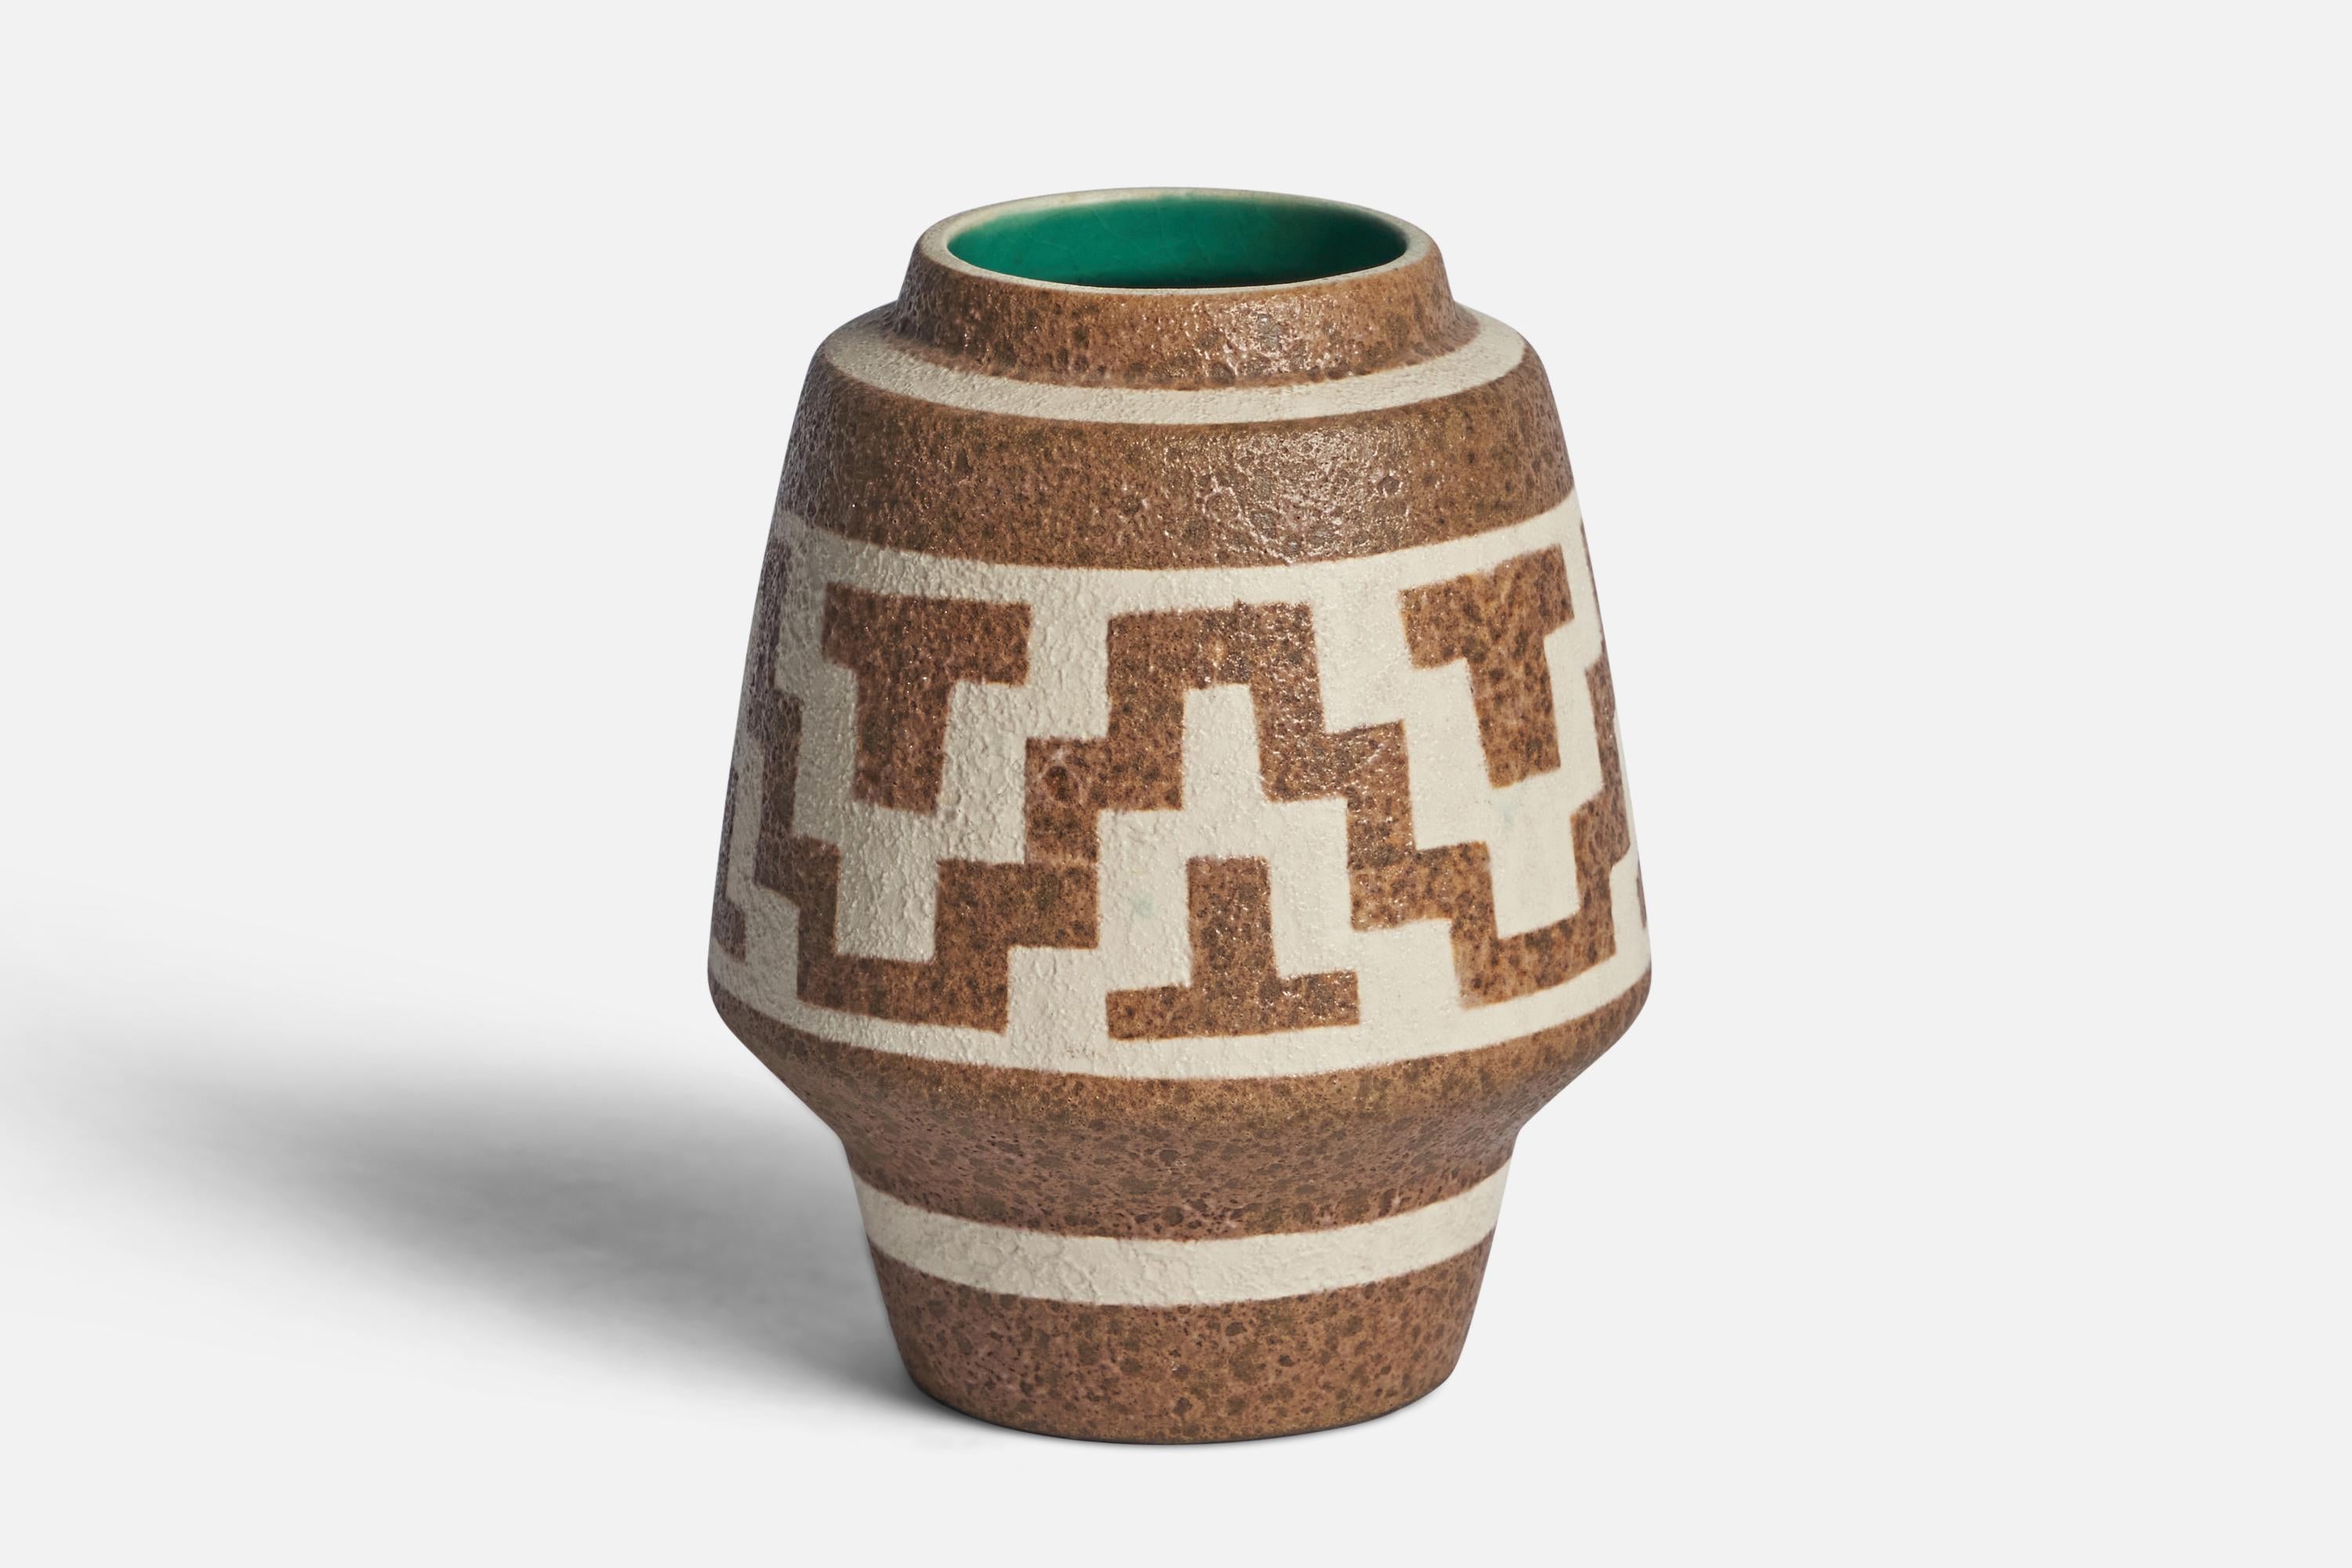 A brown, off-white and green-glazed ceramic vase designed and produced by Gmundner Keramik, Austria, c. 1960s.